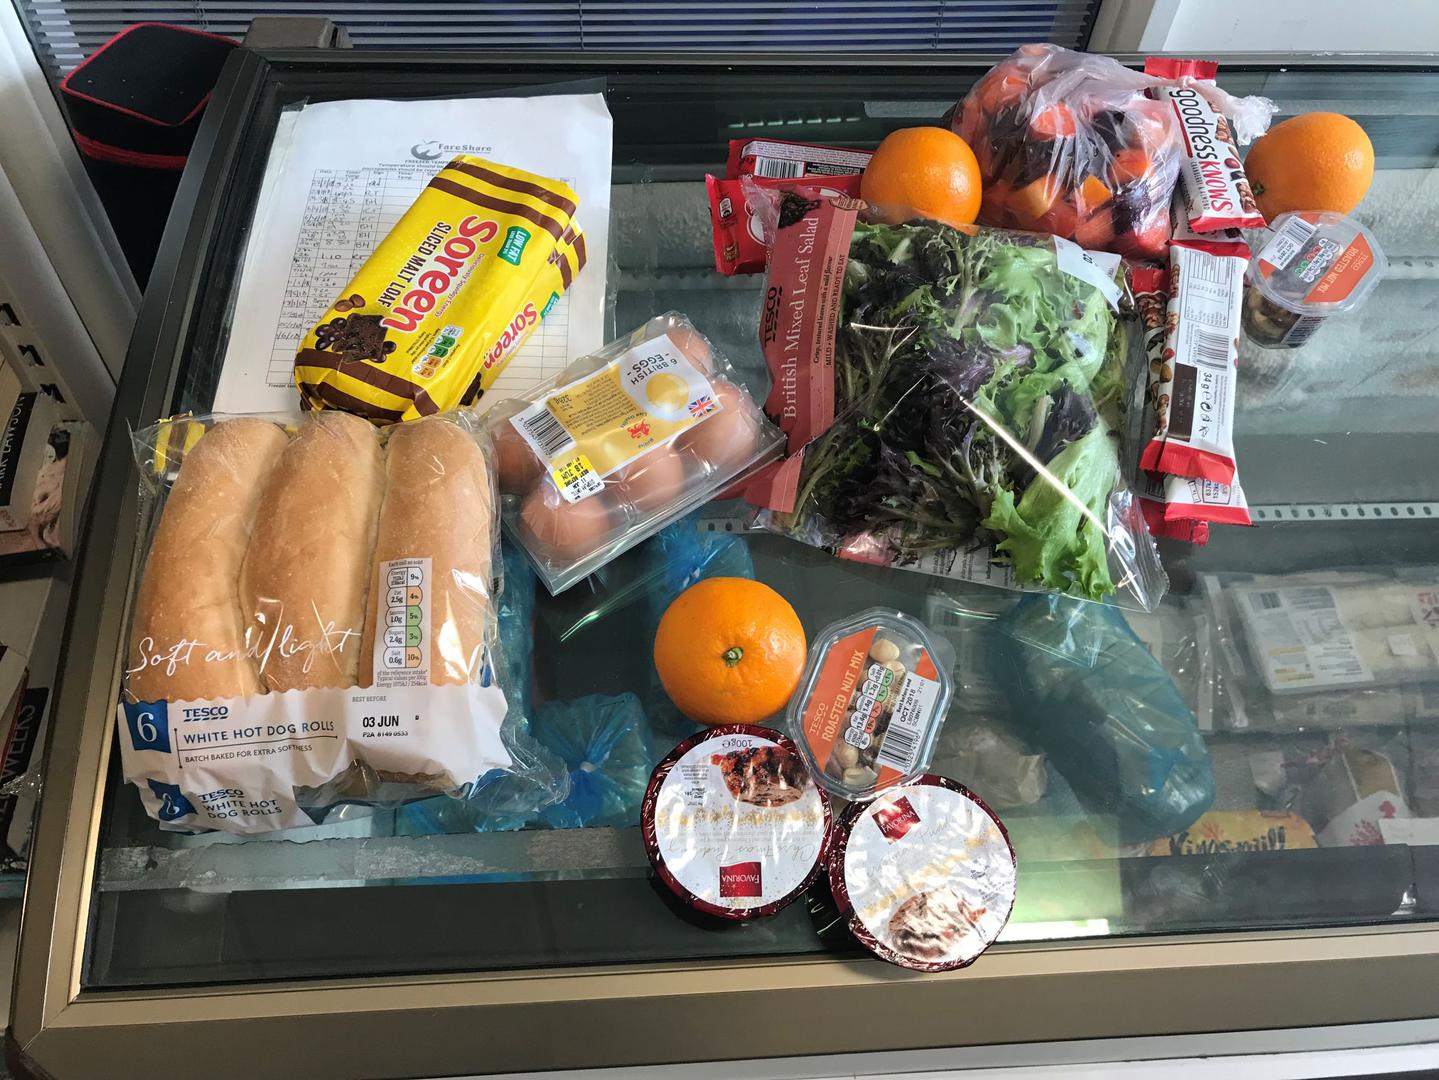 Members of the Goodwin Community Pantry can choose a limited number of low-cost items, every week for a fixed total price of £3 or £5. These are the contents of individual shopping baskets chosen by pantry users, May 2018. 